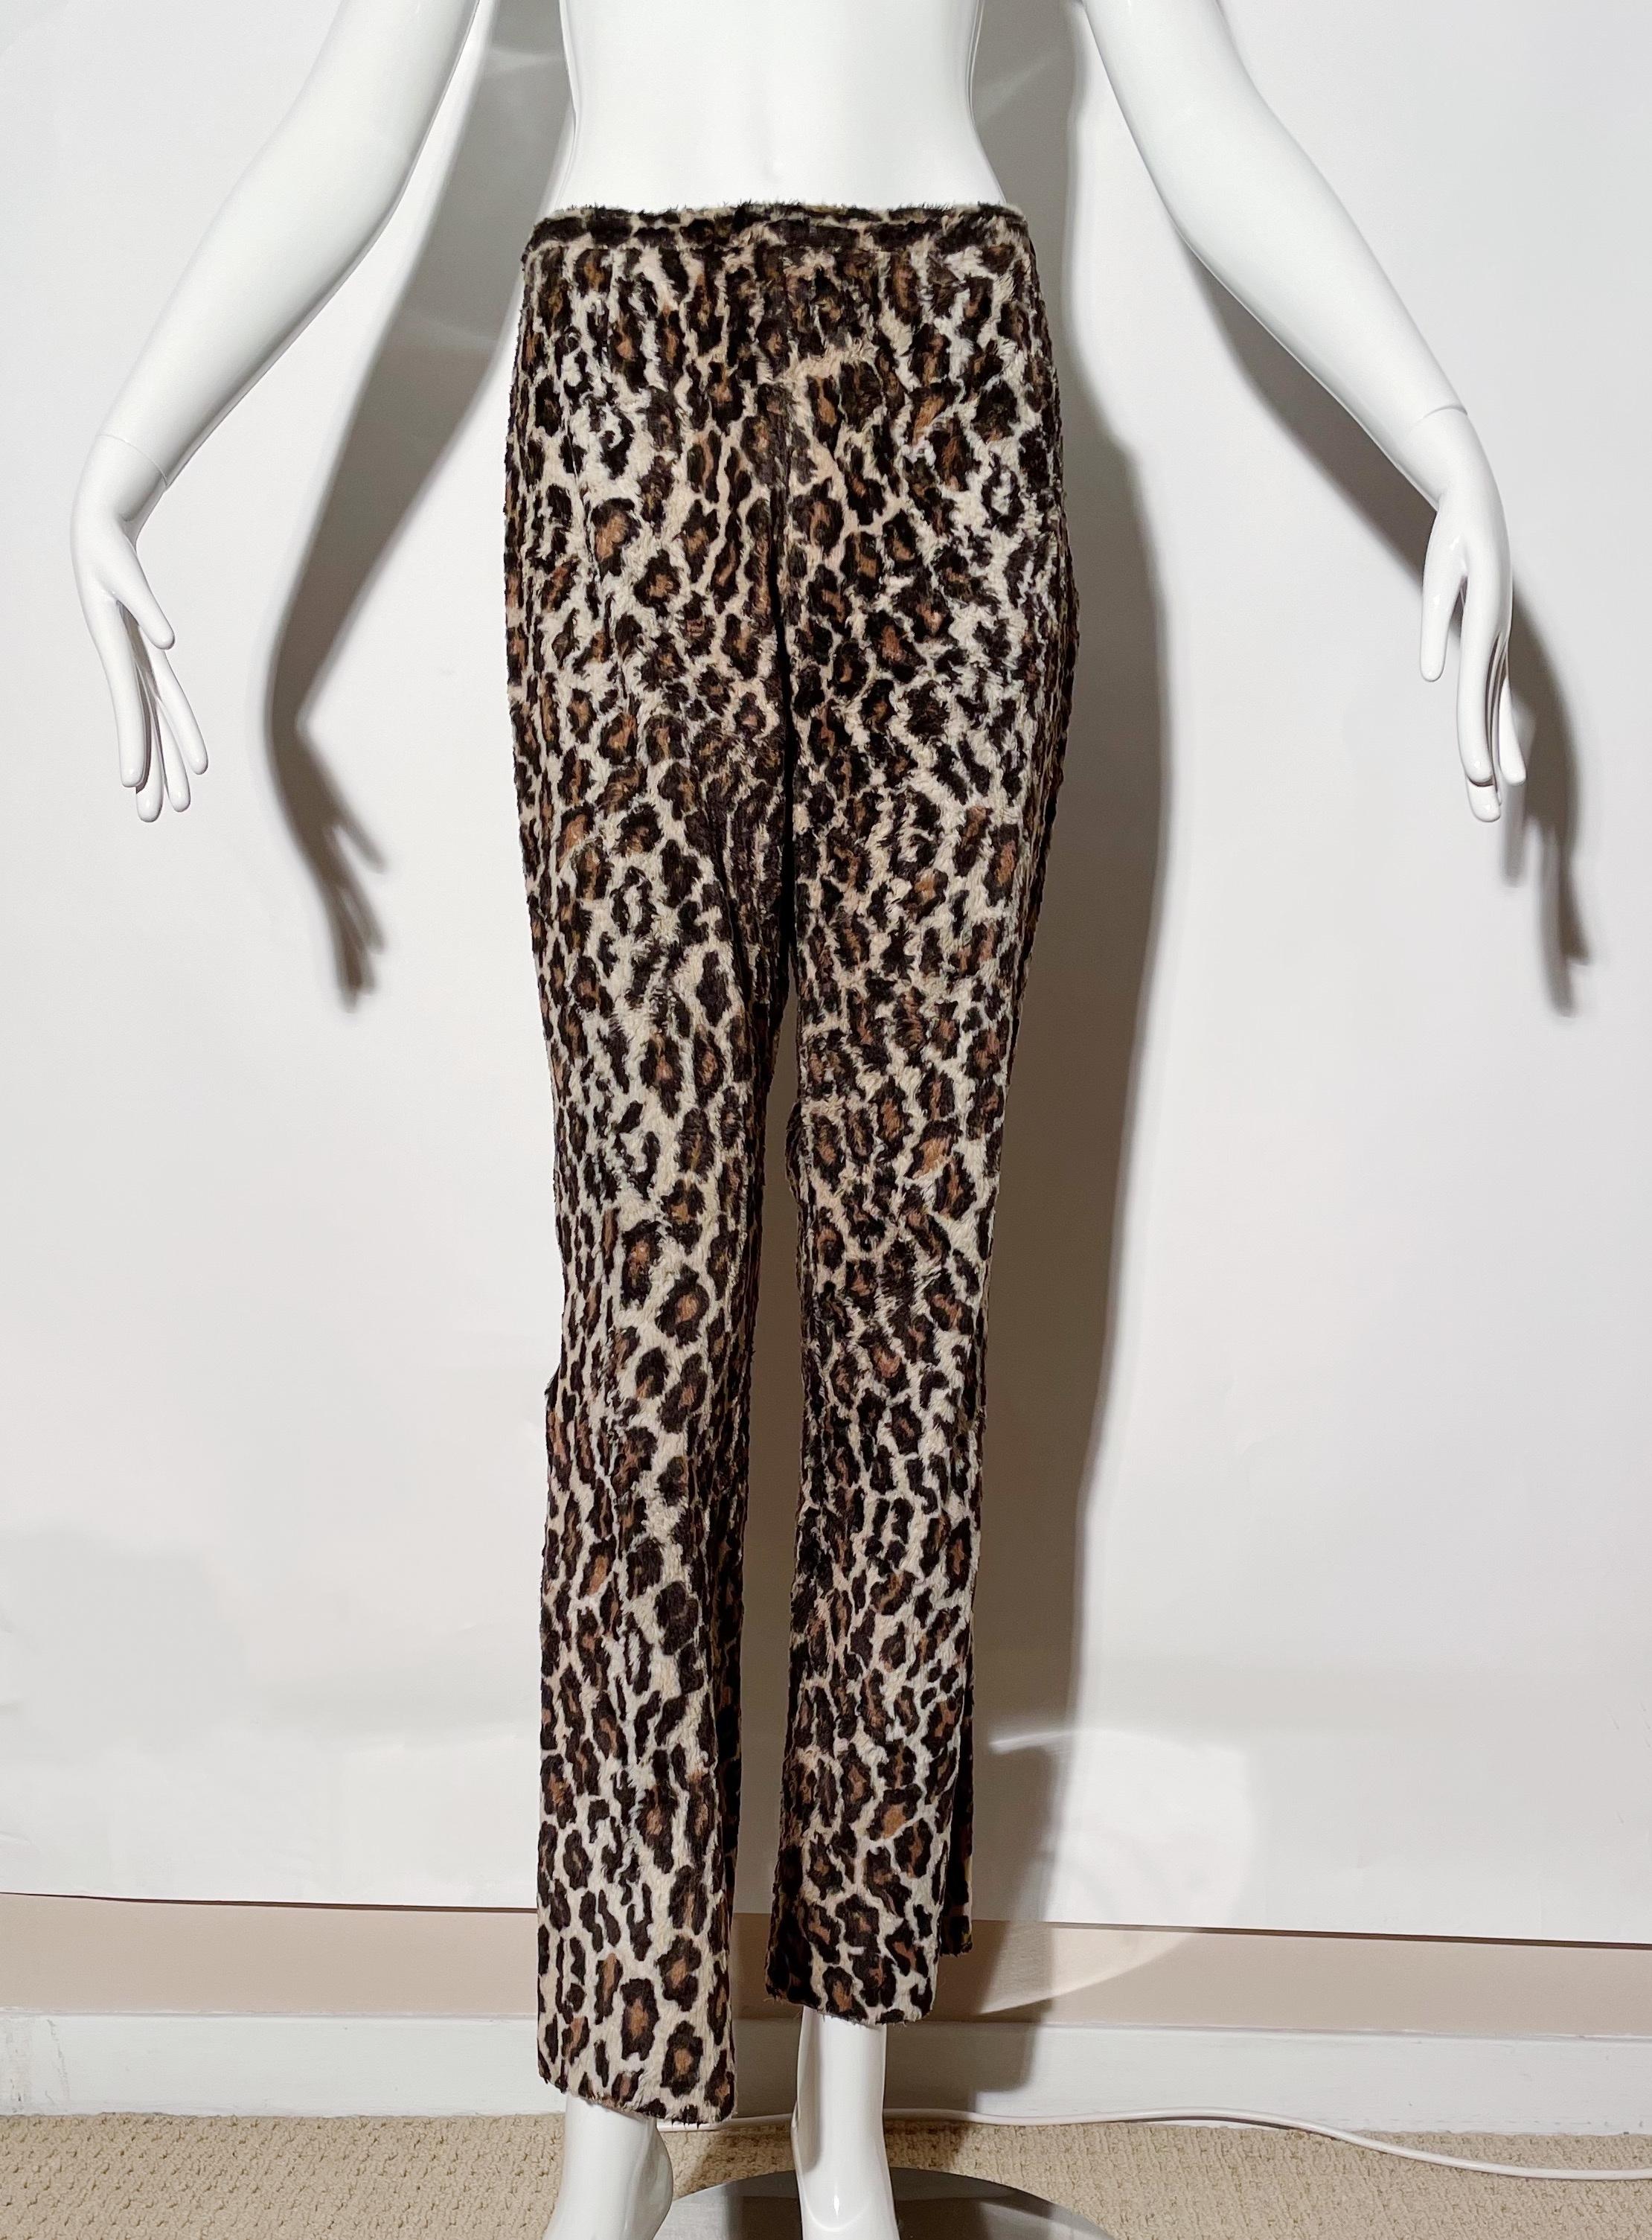 Fuzzy leopard print pants. Side zipper closure. Bootcut. 
*Condition: excellent vintage condition. No visible flaws.

Measurements Taken Laying Flat (inches)—
Waist: 29 in.
Hip: 34 in.
Rise: 10 in.
Inseam: 29 in.
Marked size: 44 IT, best fit for